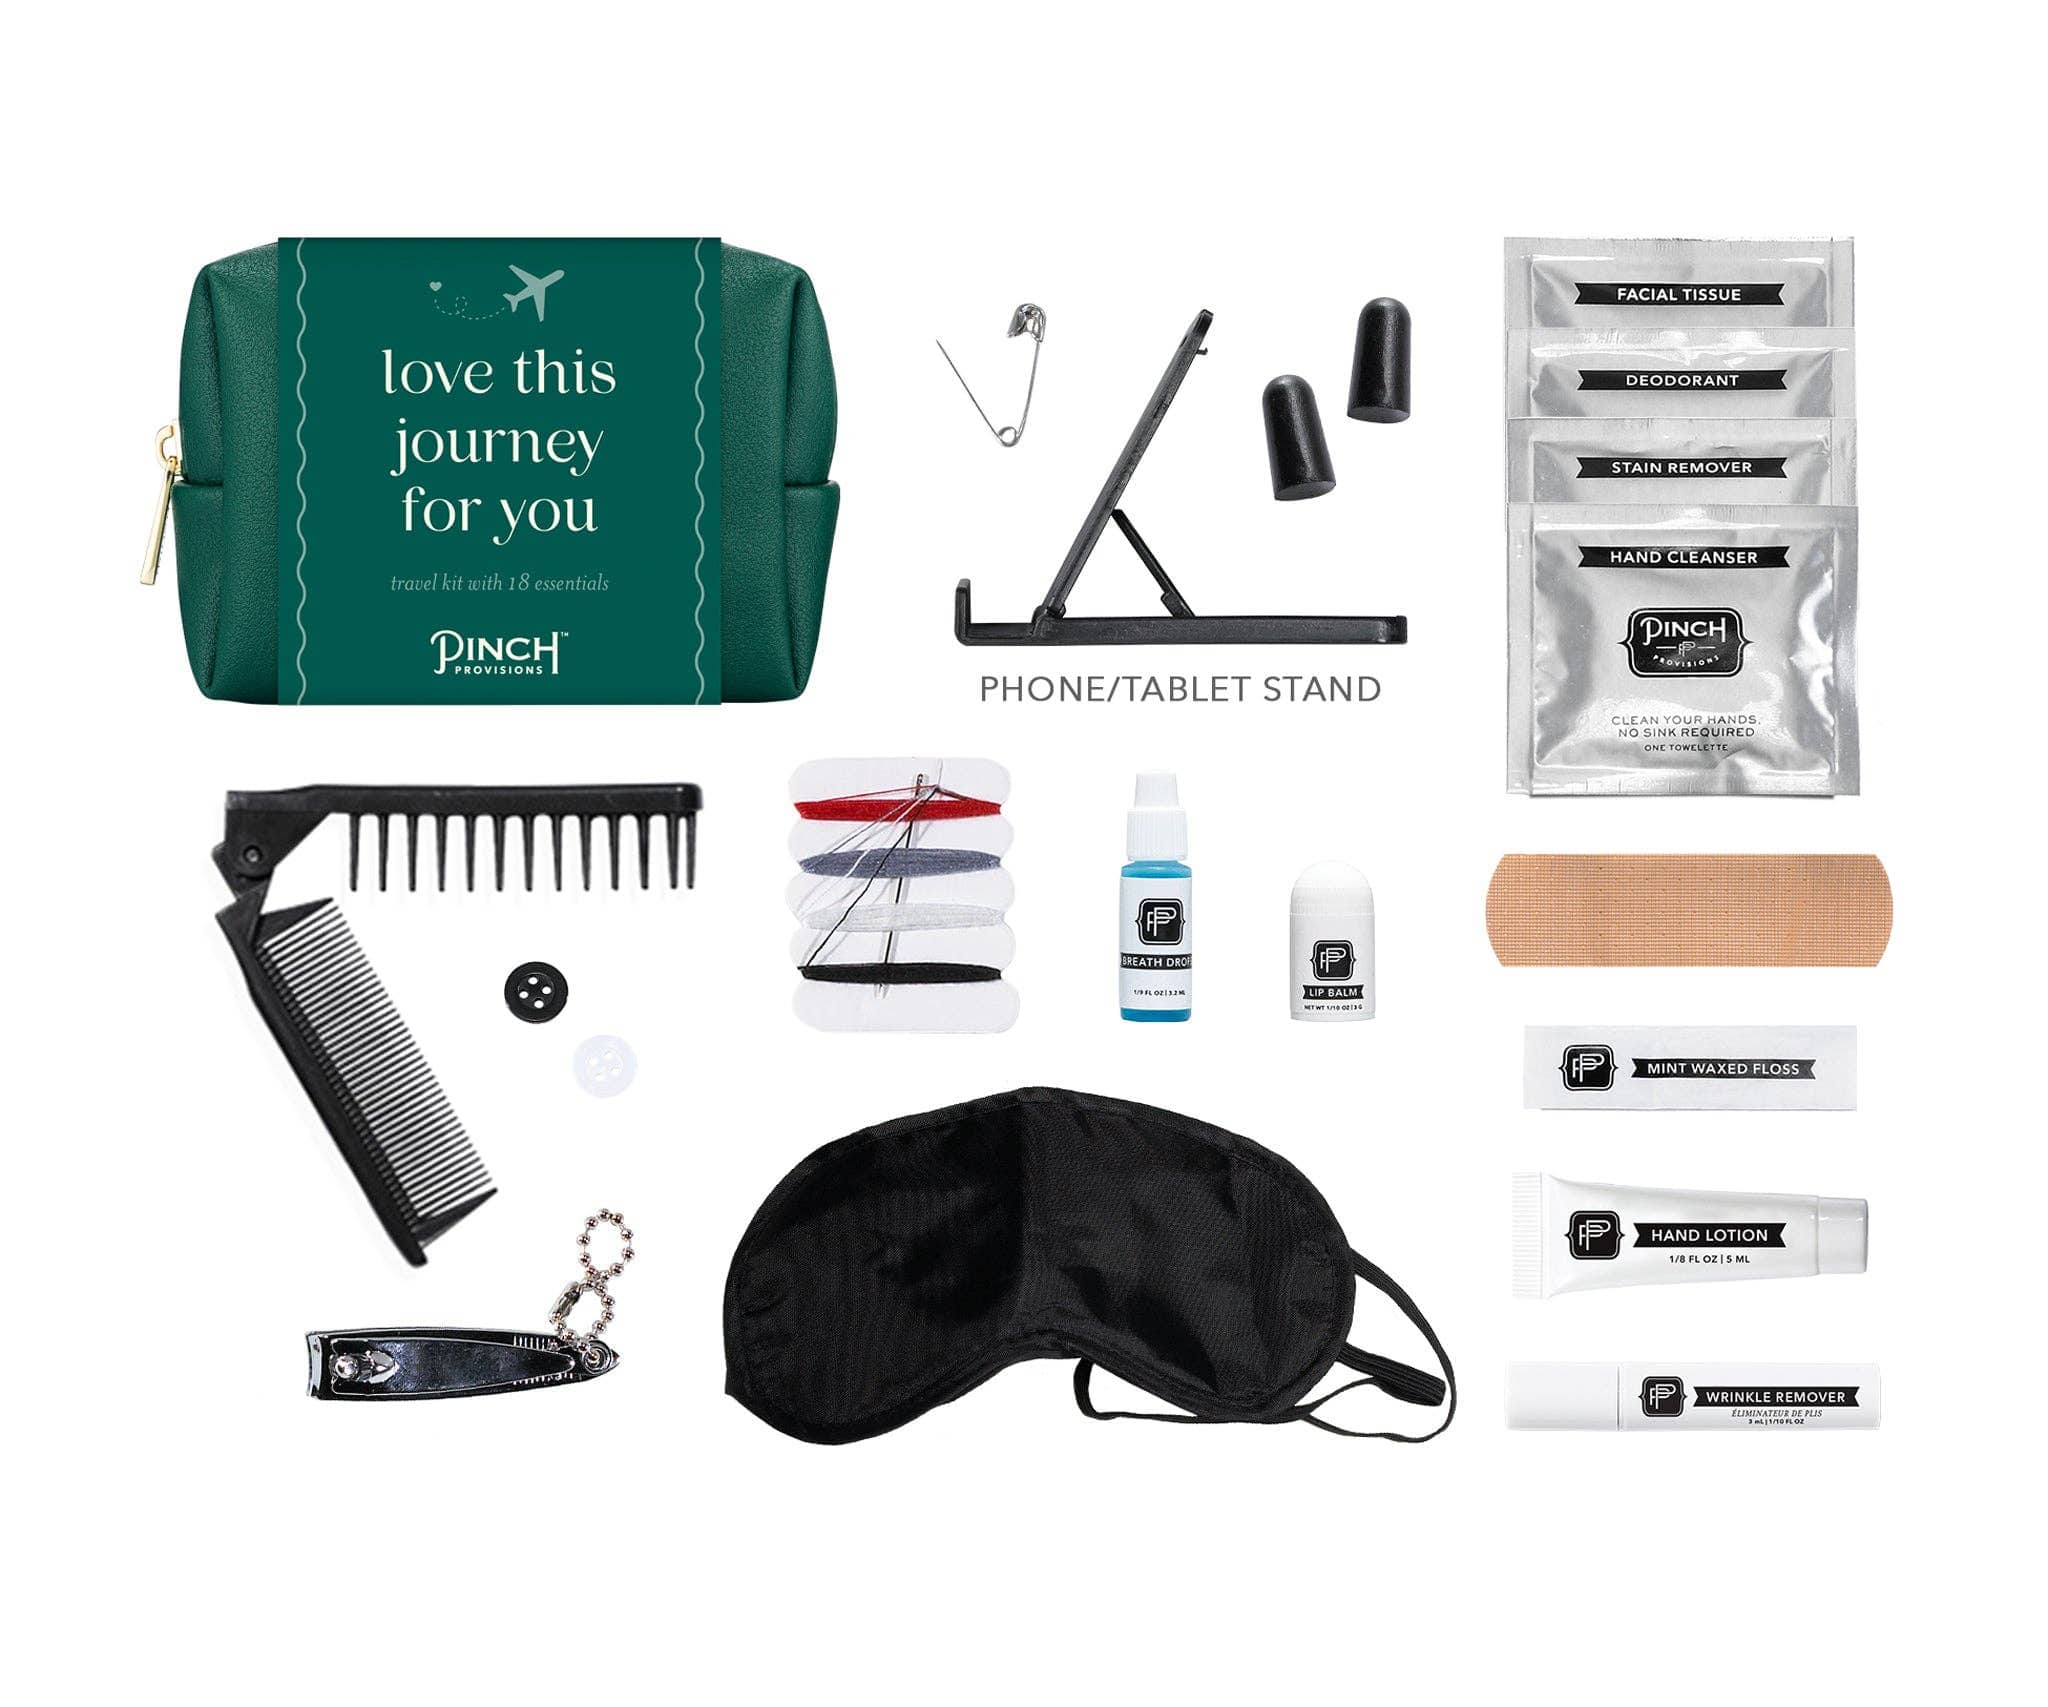 "Love This Journey" Travel Kit by Pinch Provisions